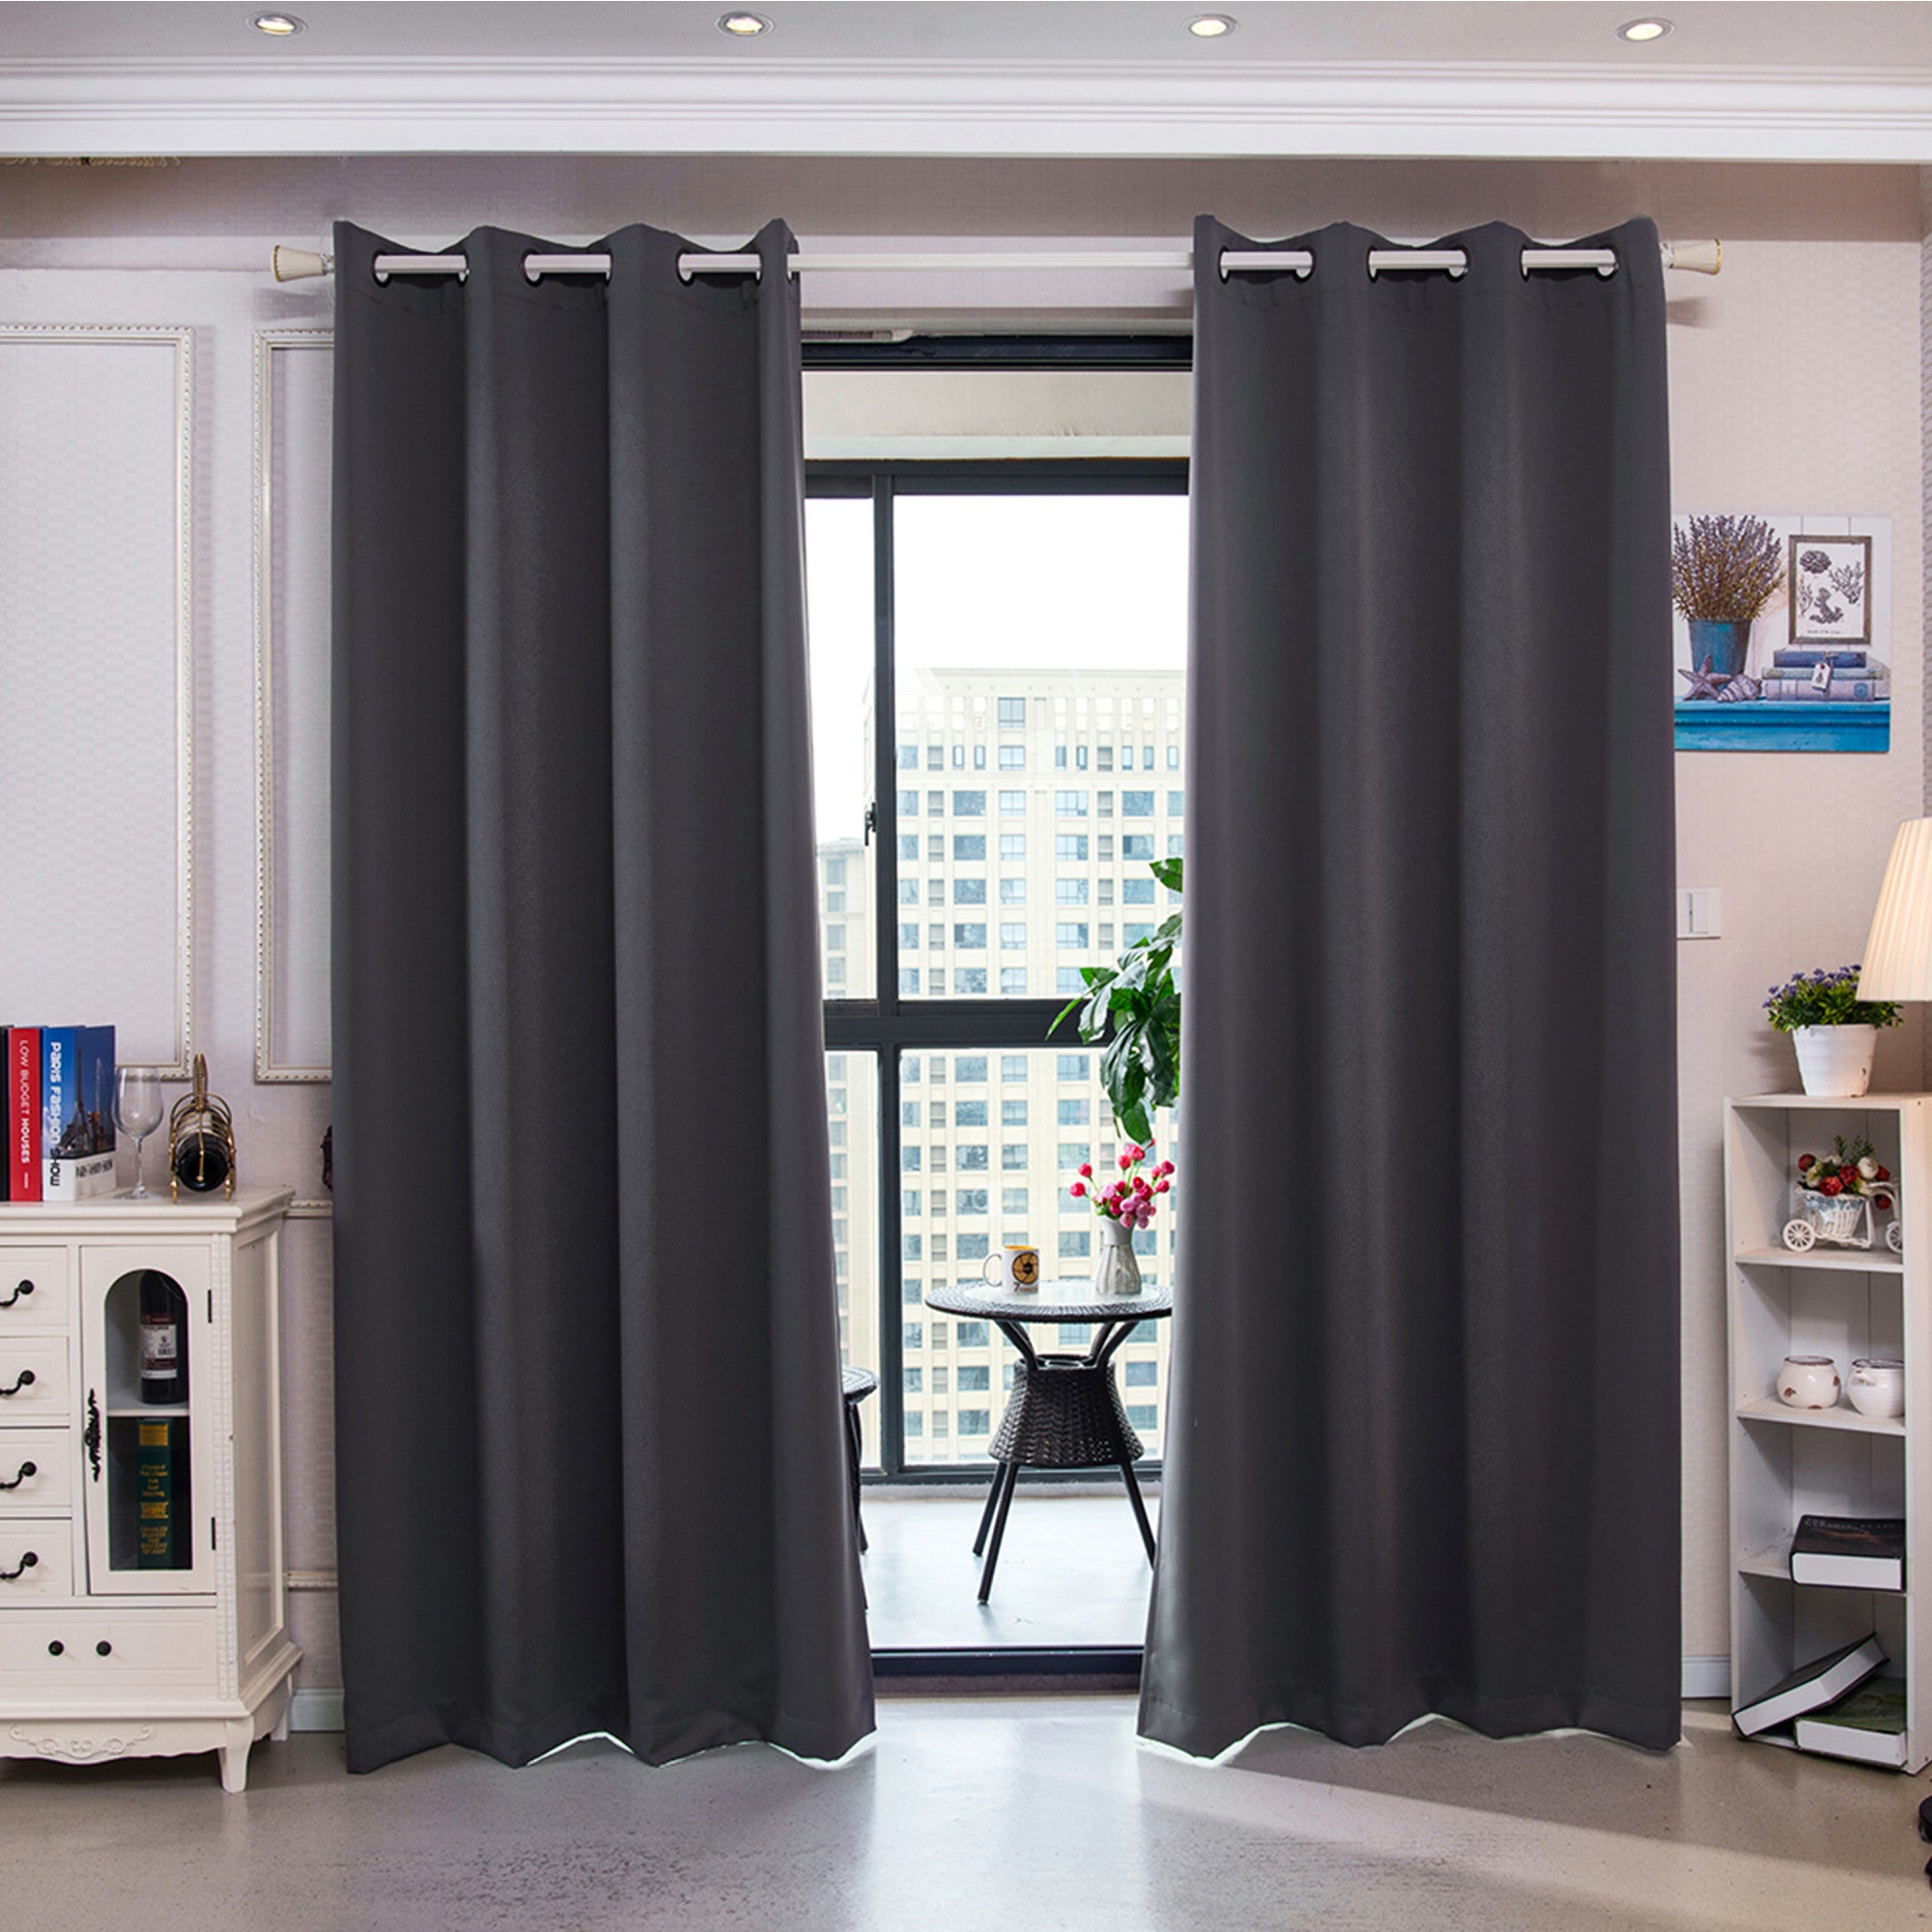 Teamson Home 84" Sparta Premium Solid Insulated Thermal Blackout Window Curtain Panels with Grommets, Dove Gray